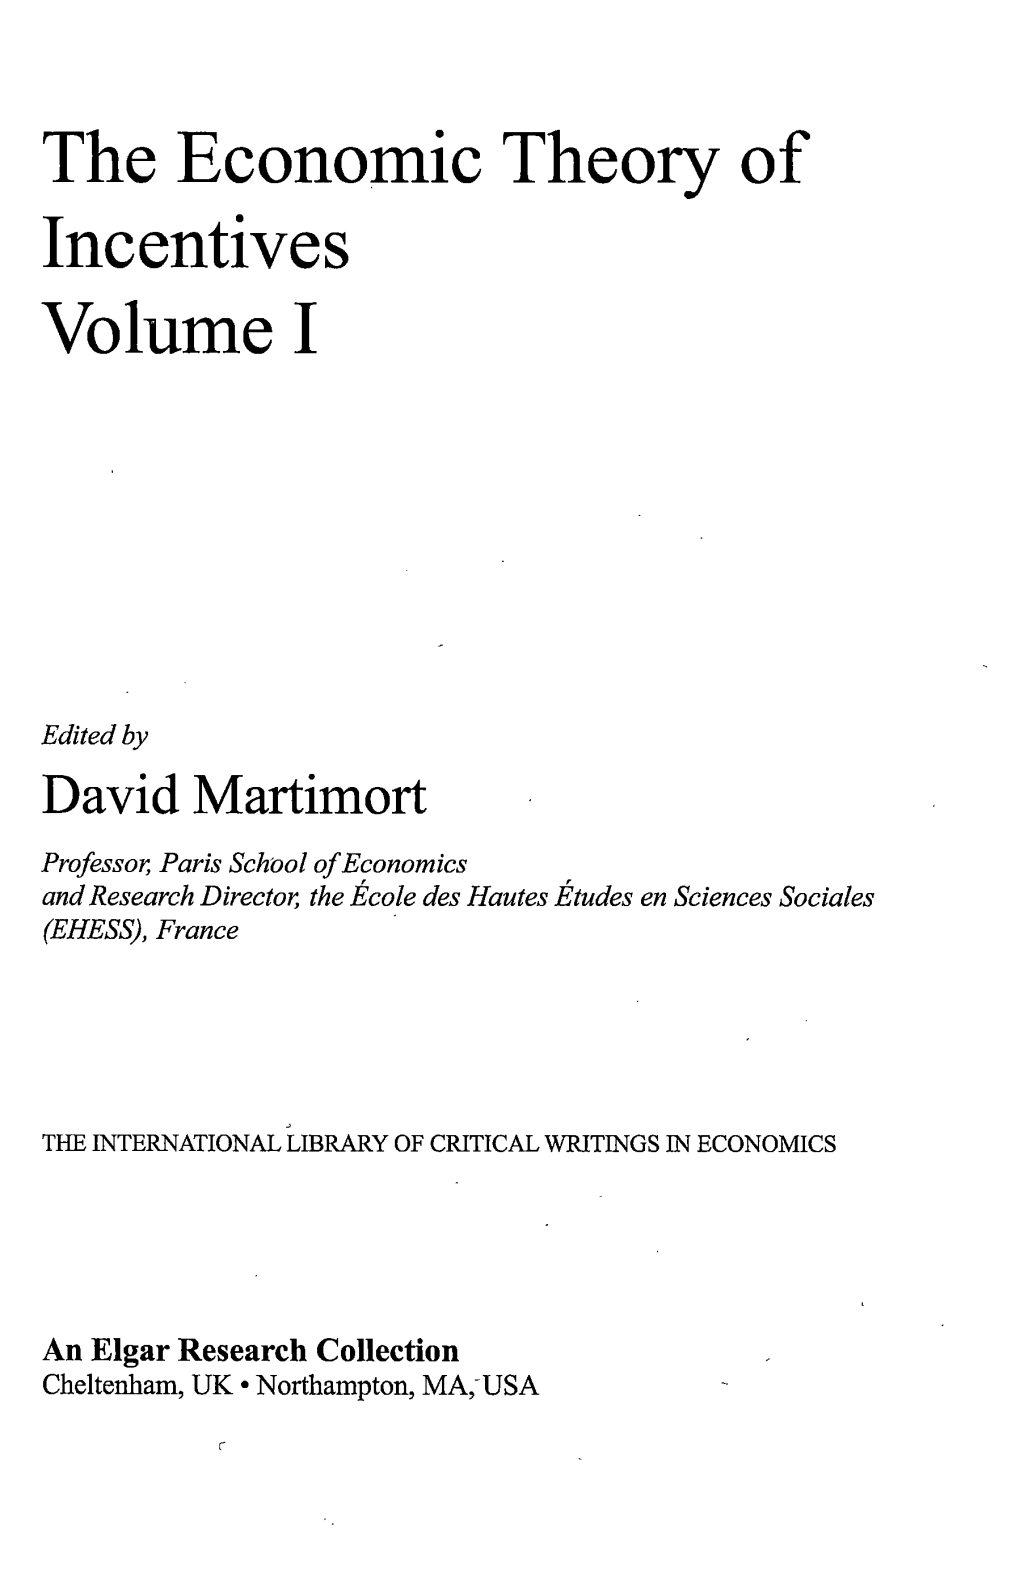 The Economic Theory of Incentives Volume I